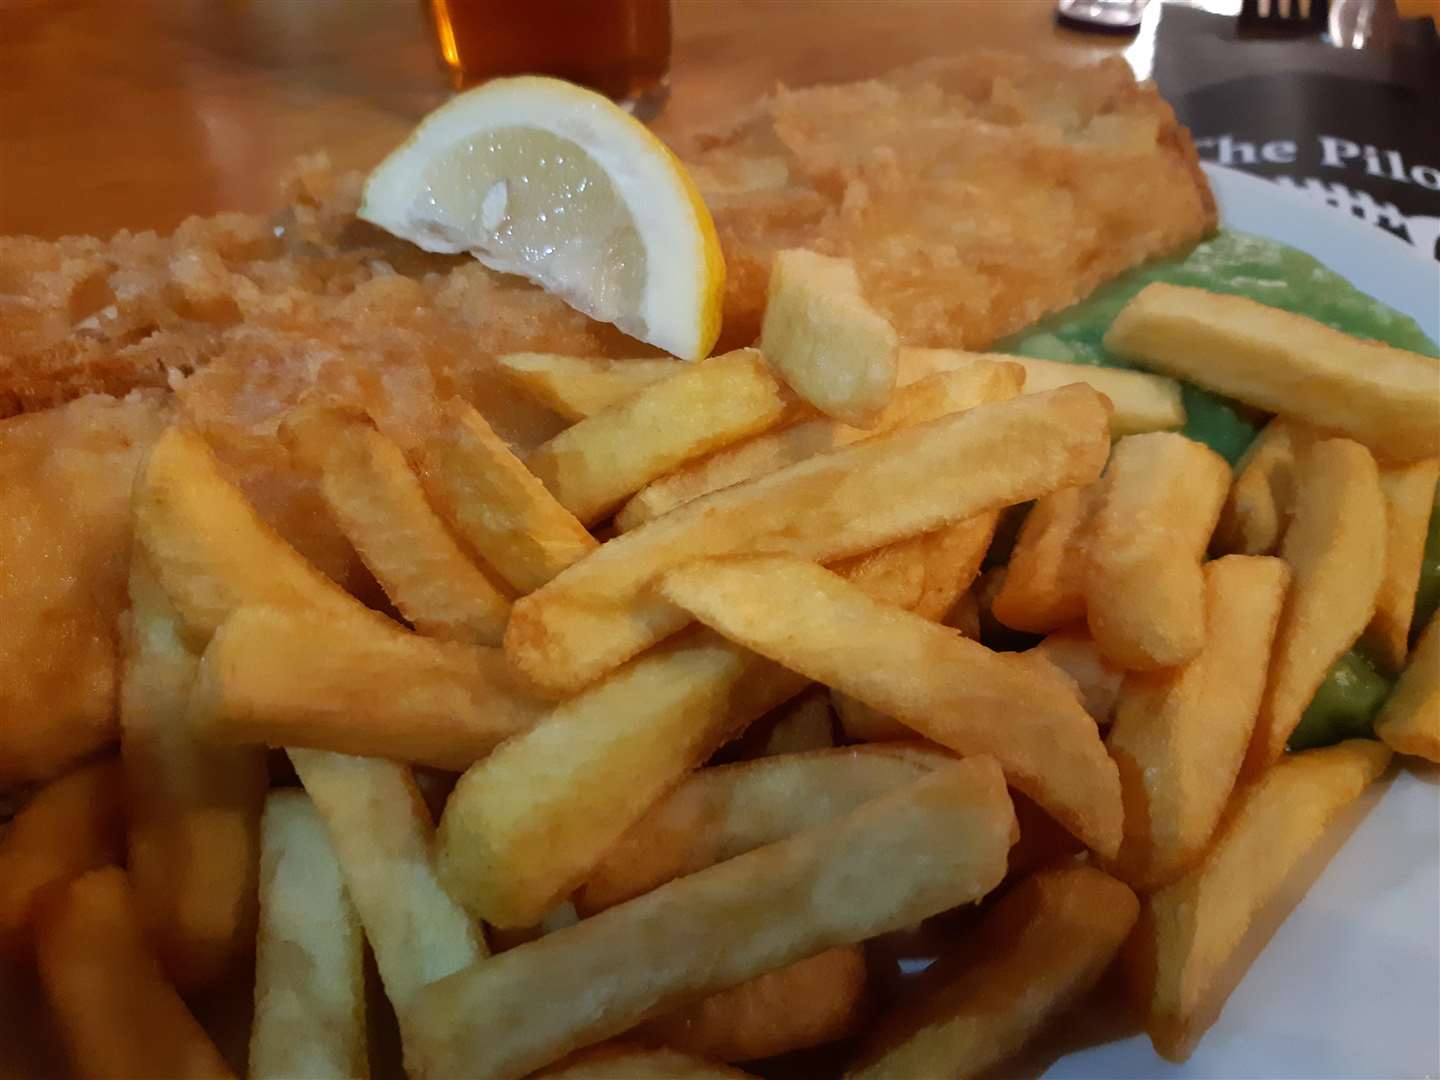 Fish and chips come in generous portions at The Pilot Inn, Dungeness (6775311)